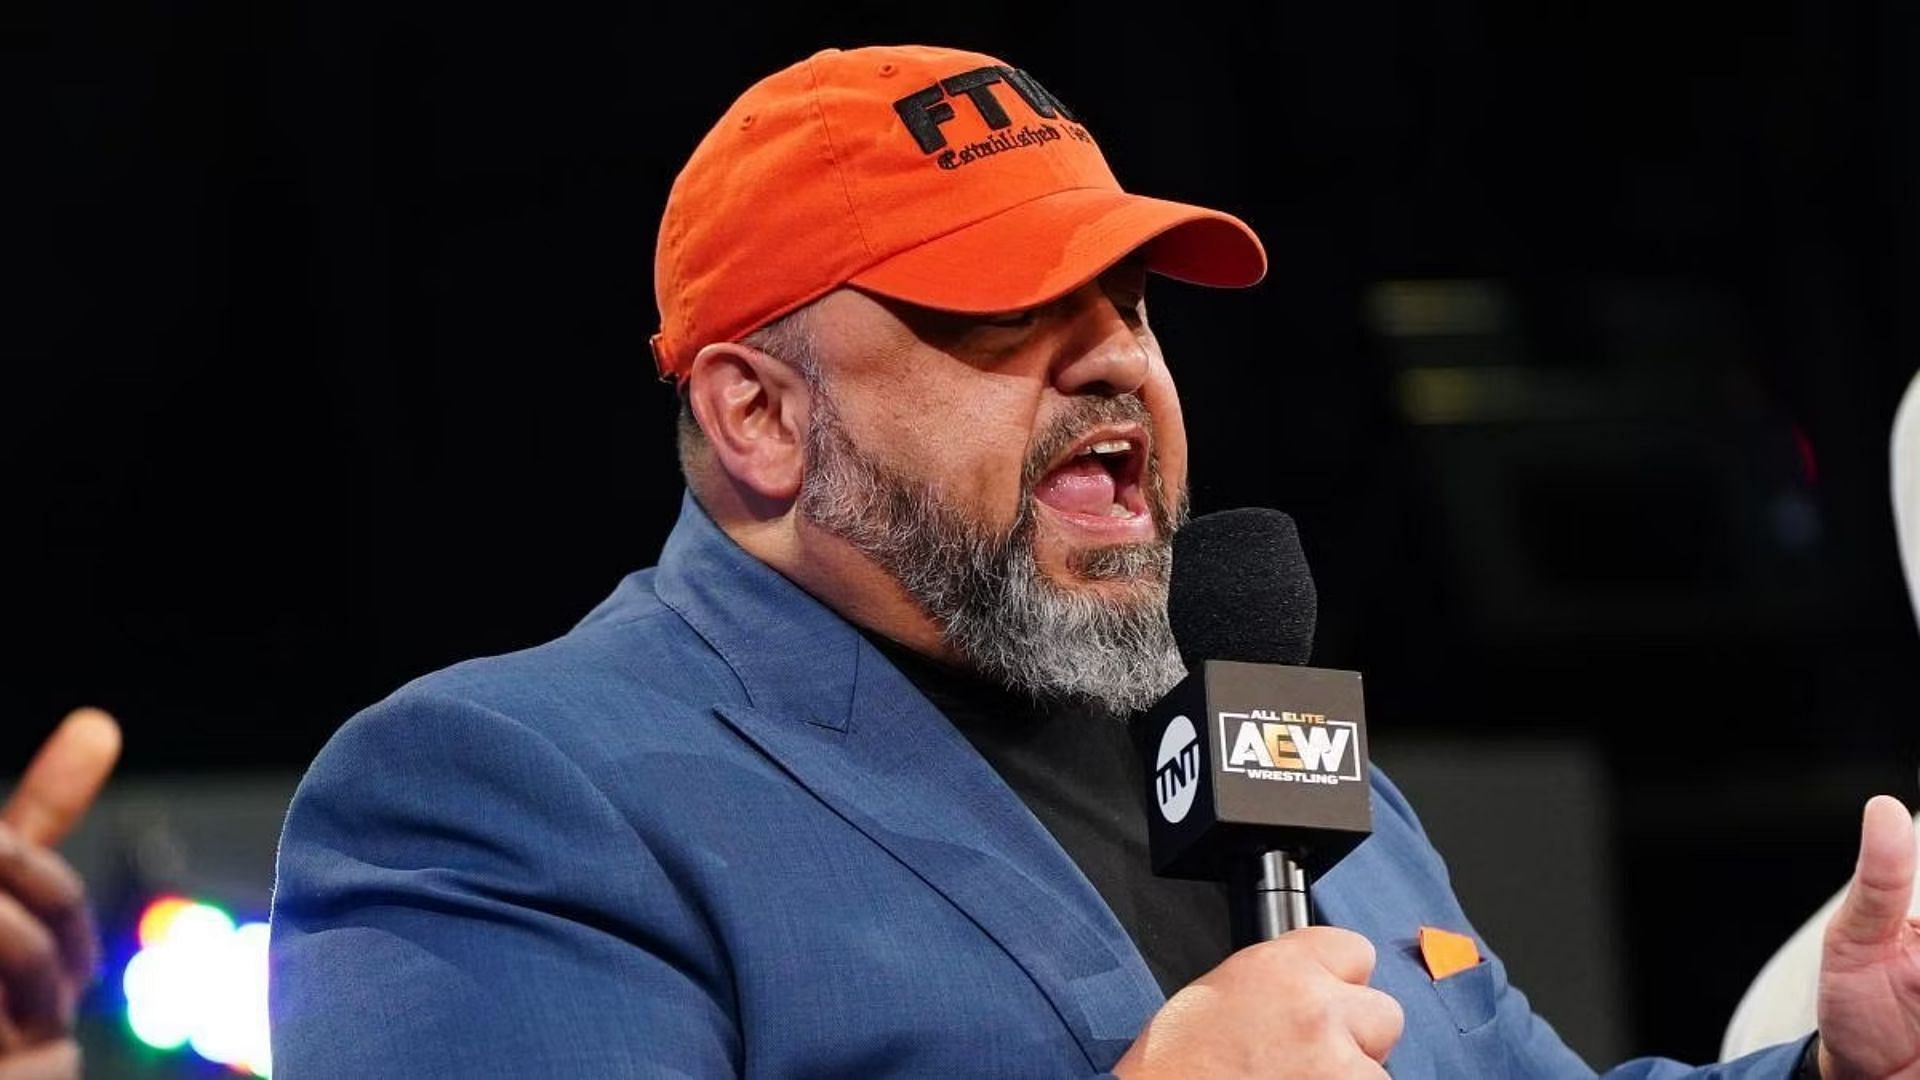 Taz is a former two-time ECW World Heavyweight Champion